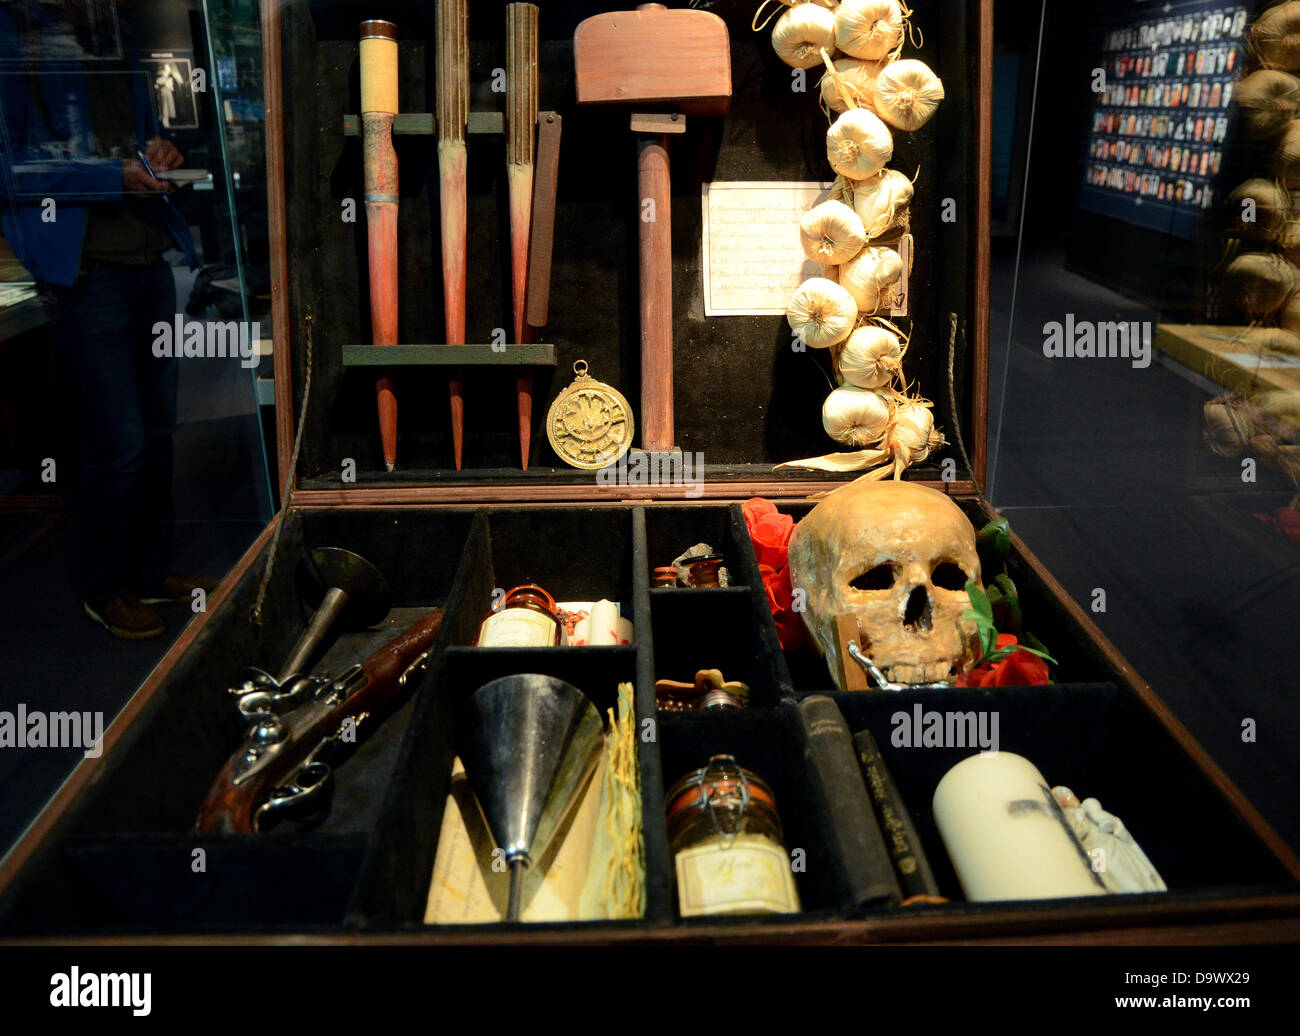 A vampire hunter suitcasewith utensils to fight vampires is part of the exhibition 'Princes of darkness - vampire cult in the cinema' ('Fürsten der Finsternis - Vampirkult im Film') at the film museum in Duesseldorf, Germany, 27 June 2013. The exhibition and a film series is shown from 28 June to 13 October 2013. Photo: HORST OSSINGER Stock Photo